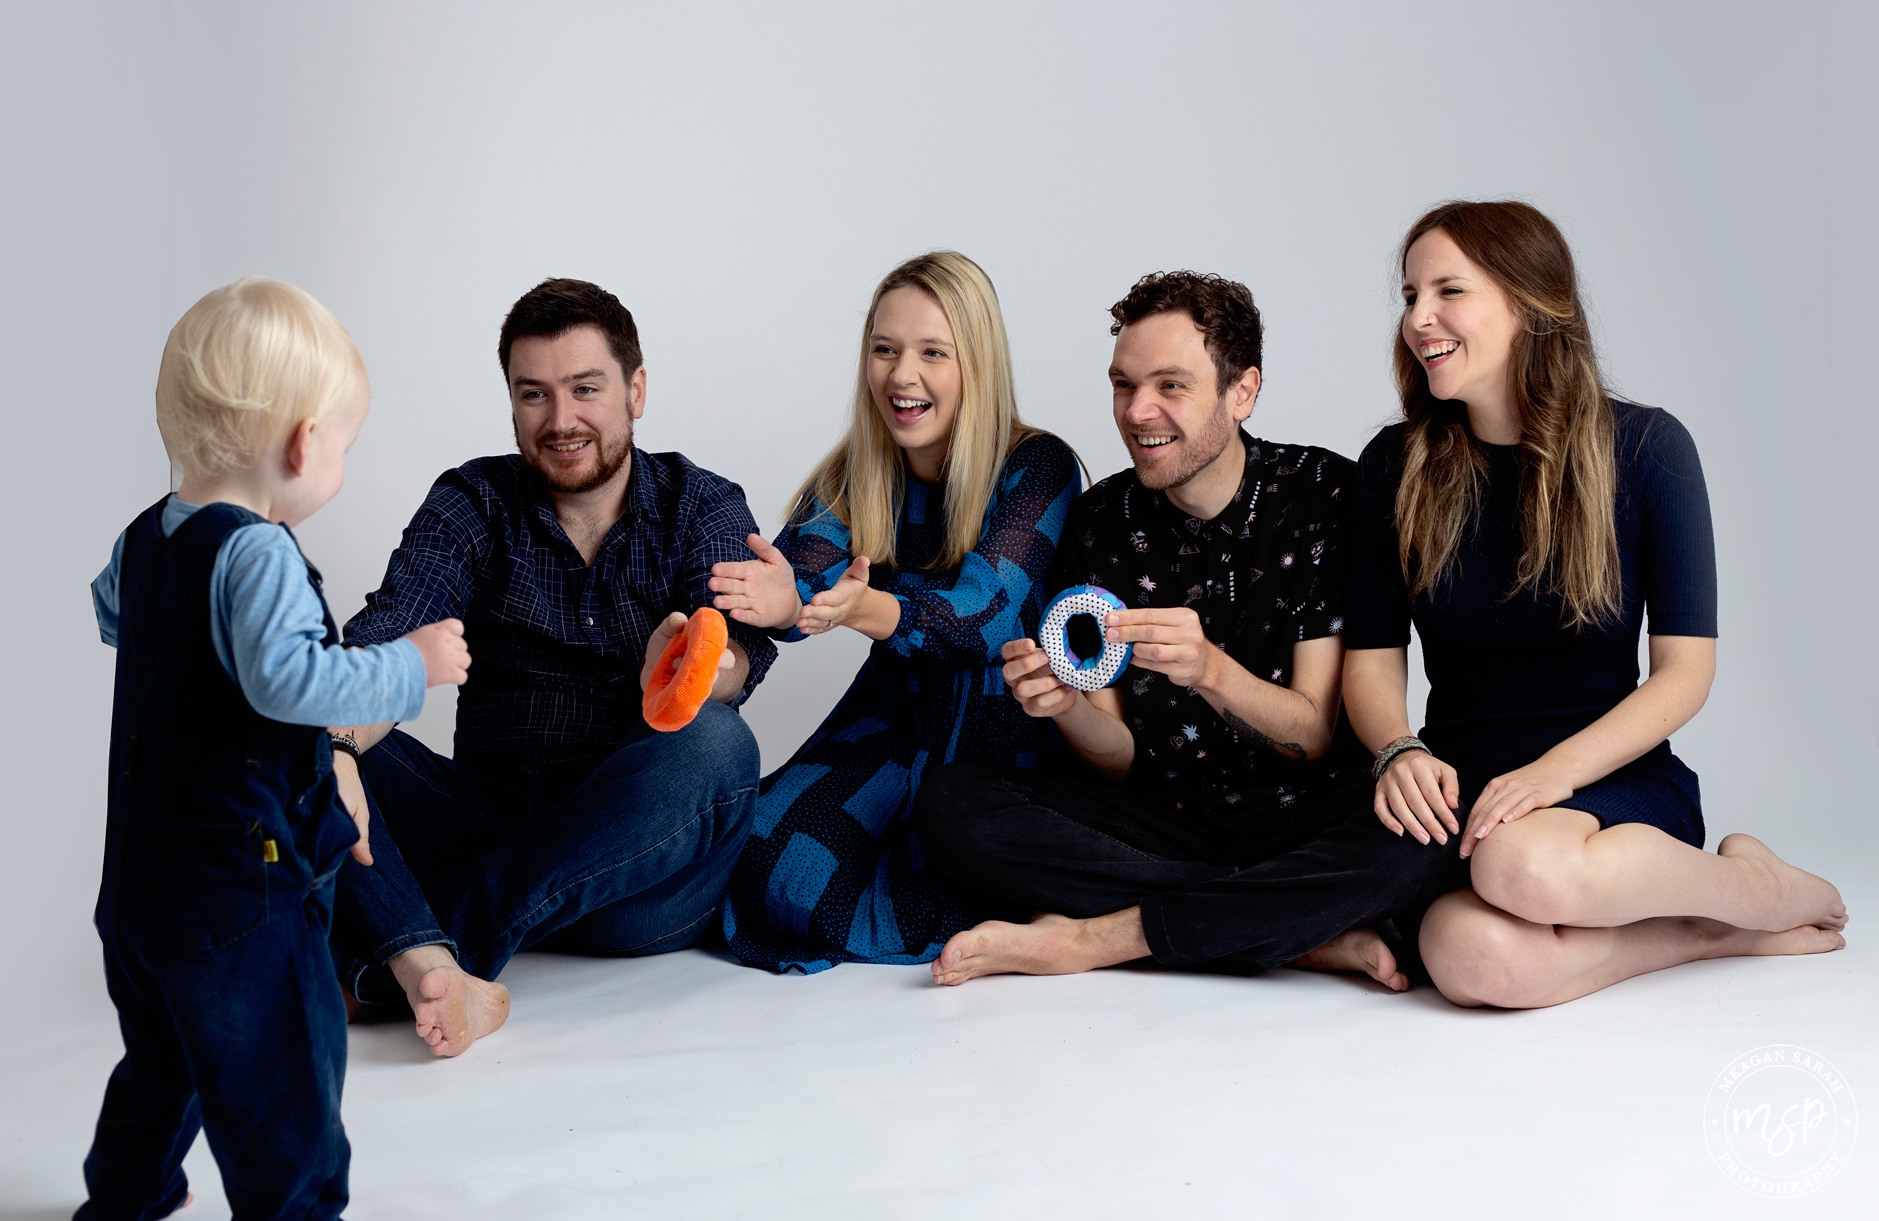 Portrait,Family,Group,Family of 7,Affordable photographer leeds,Fun Photos,Horsforth,Leeds,Little Ones,Meagan Sarah Photography,Photographs,Pictures,Professional Photographer in Leeds,Studio,White background,West Yorkshire Photographer,